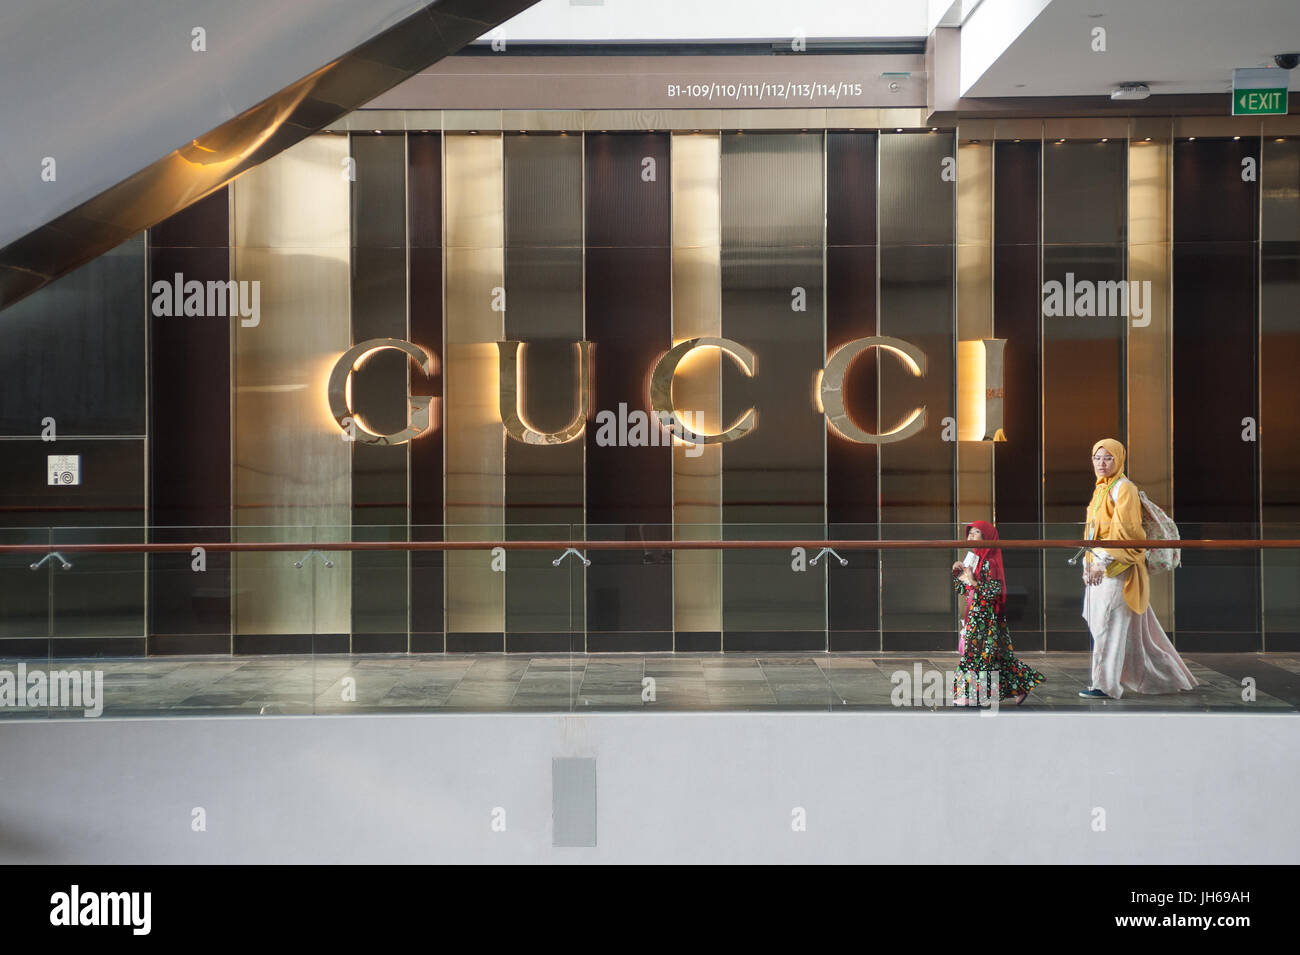 25.05.2017, Singapore, Republic of Singapore, Asia - A woman and her daughter walk by a retail shop of the luxury brand Gucci in 'The Shoppes' mall. Stock Photo